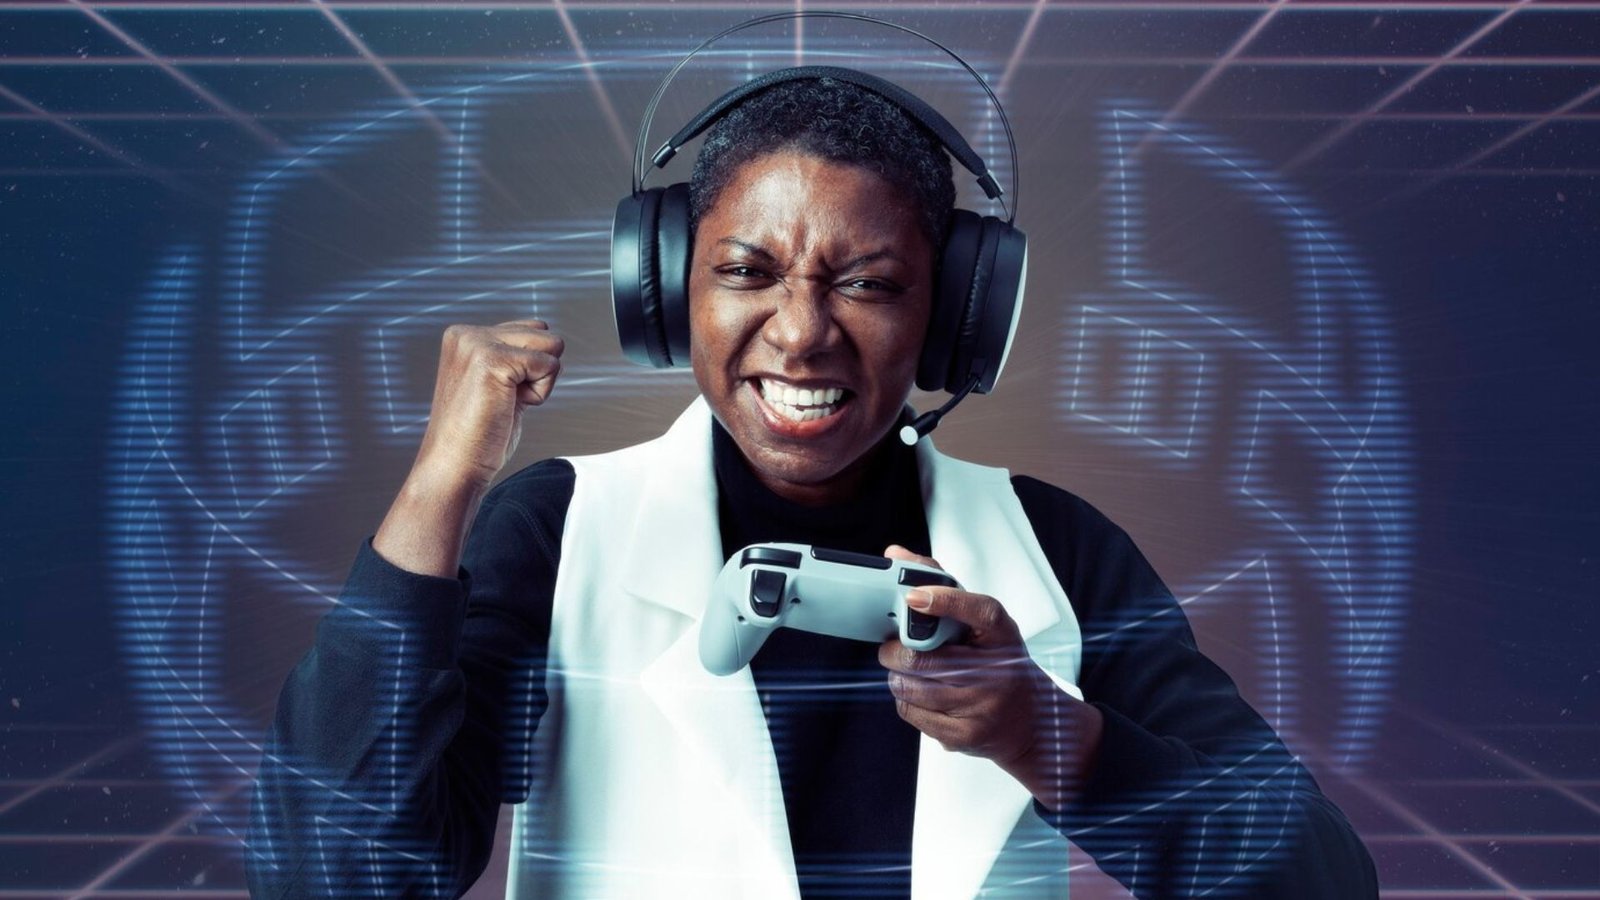 woman with headphones and gaming pads